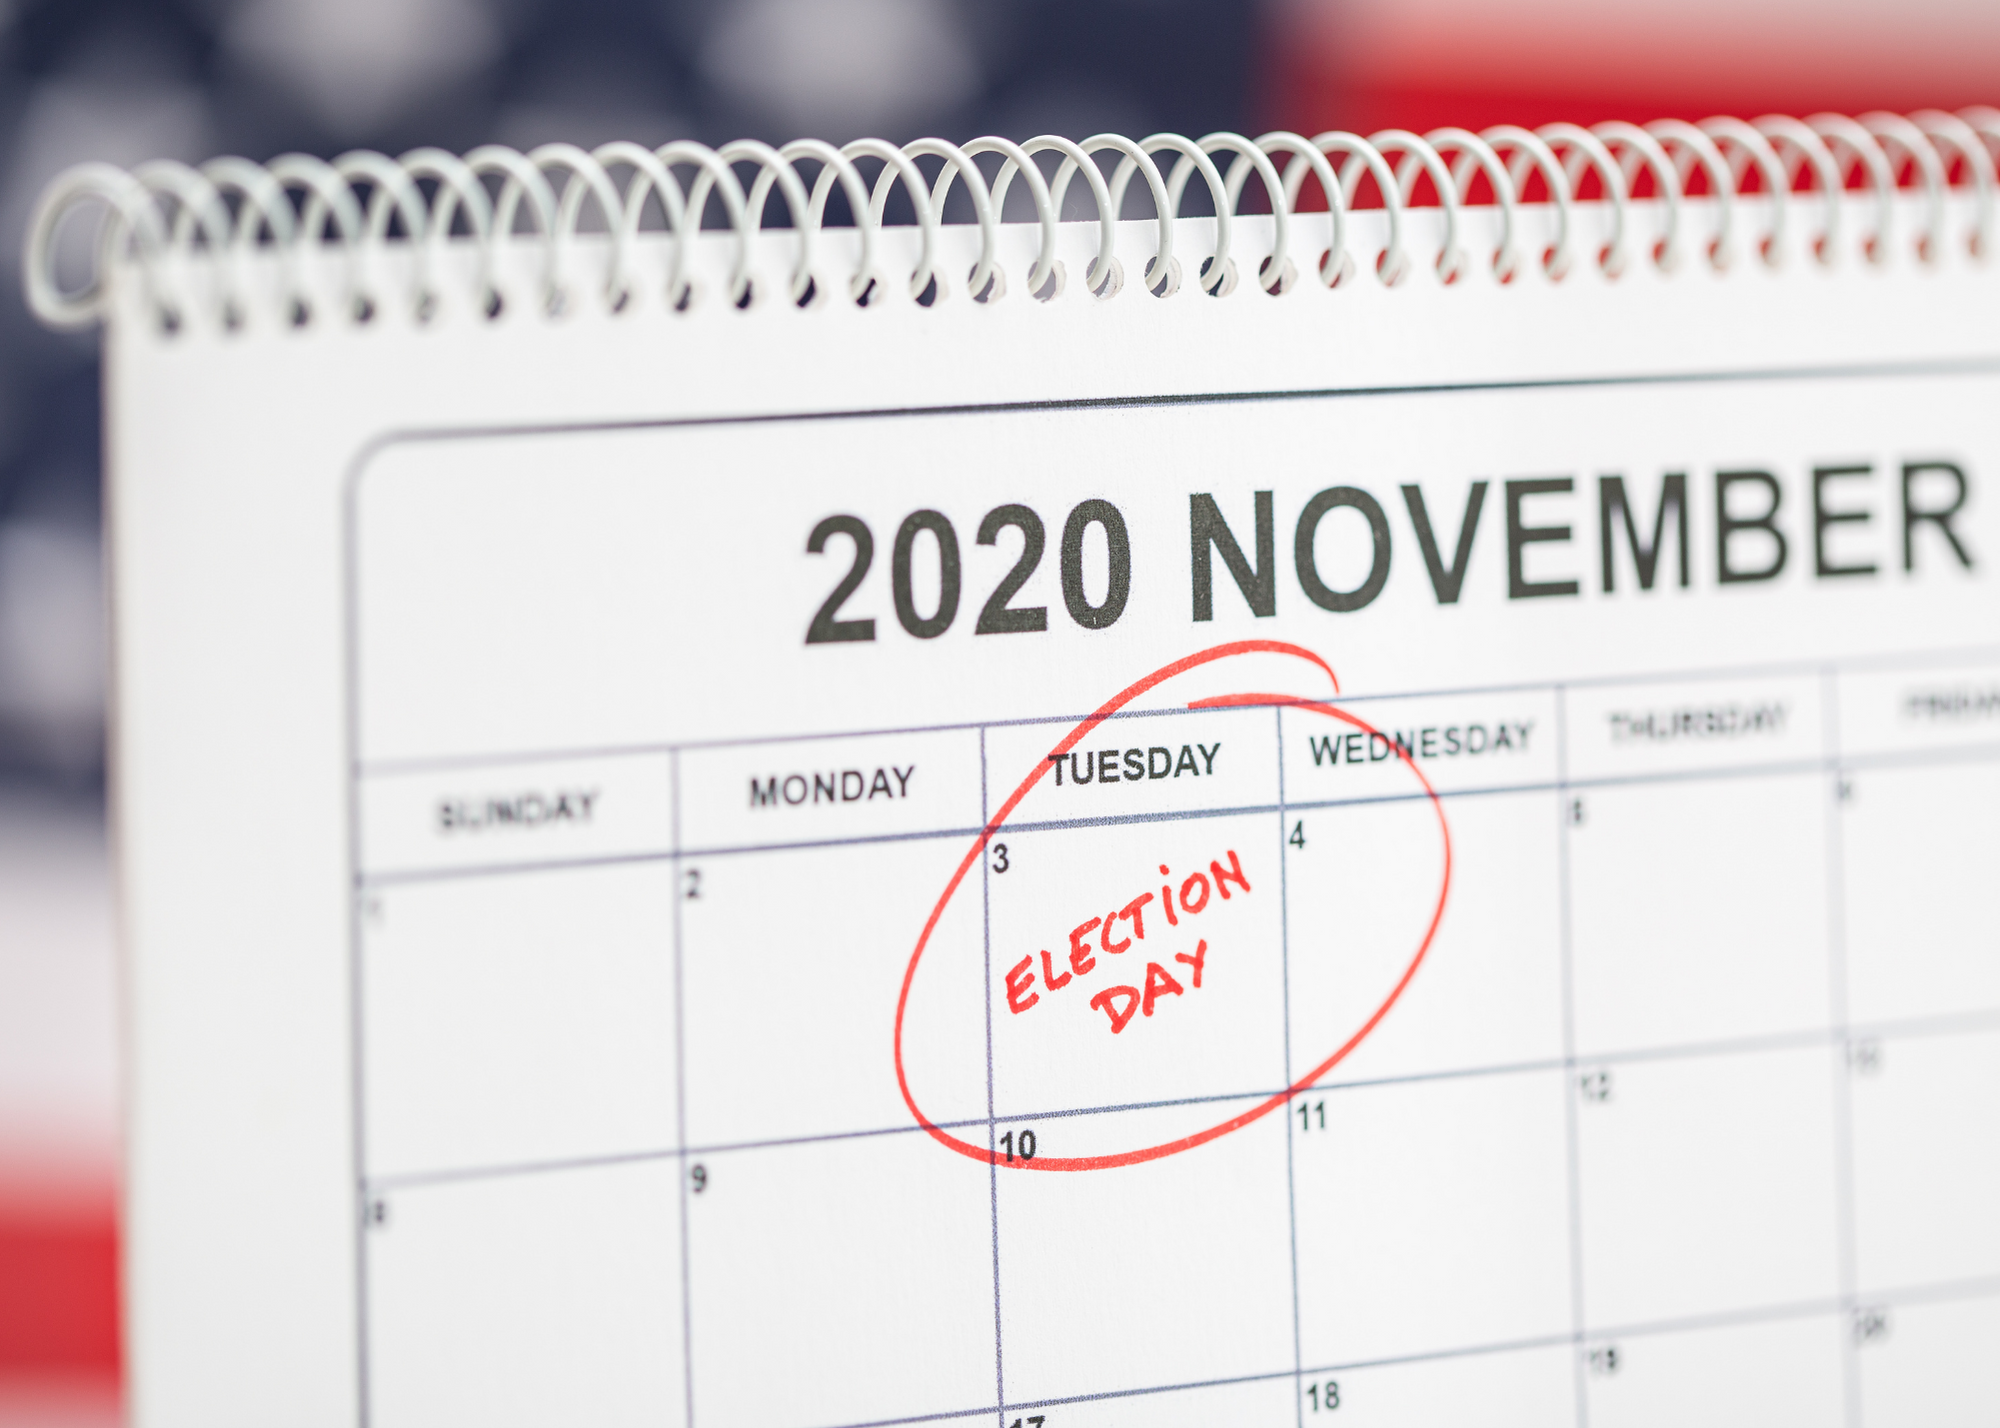 2020 November calendar page with election day noted